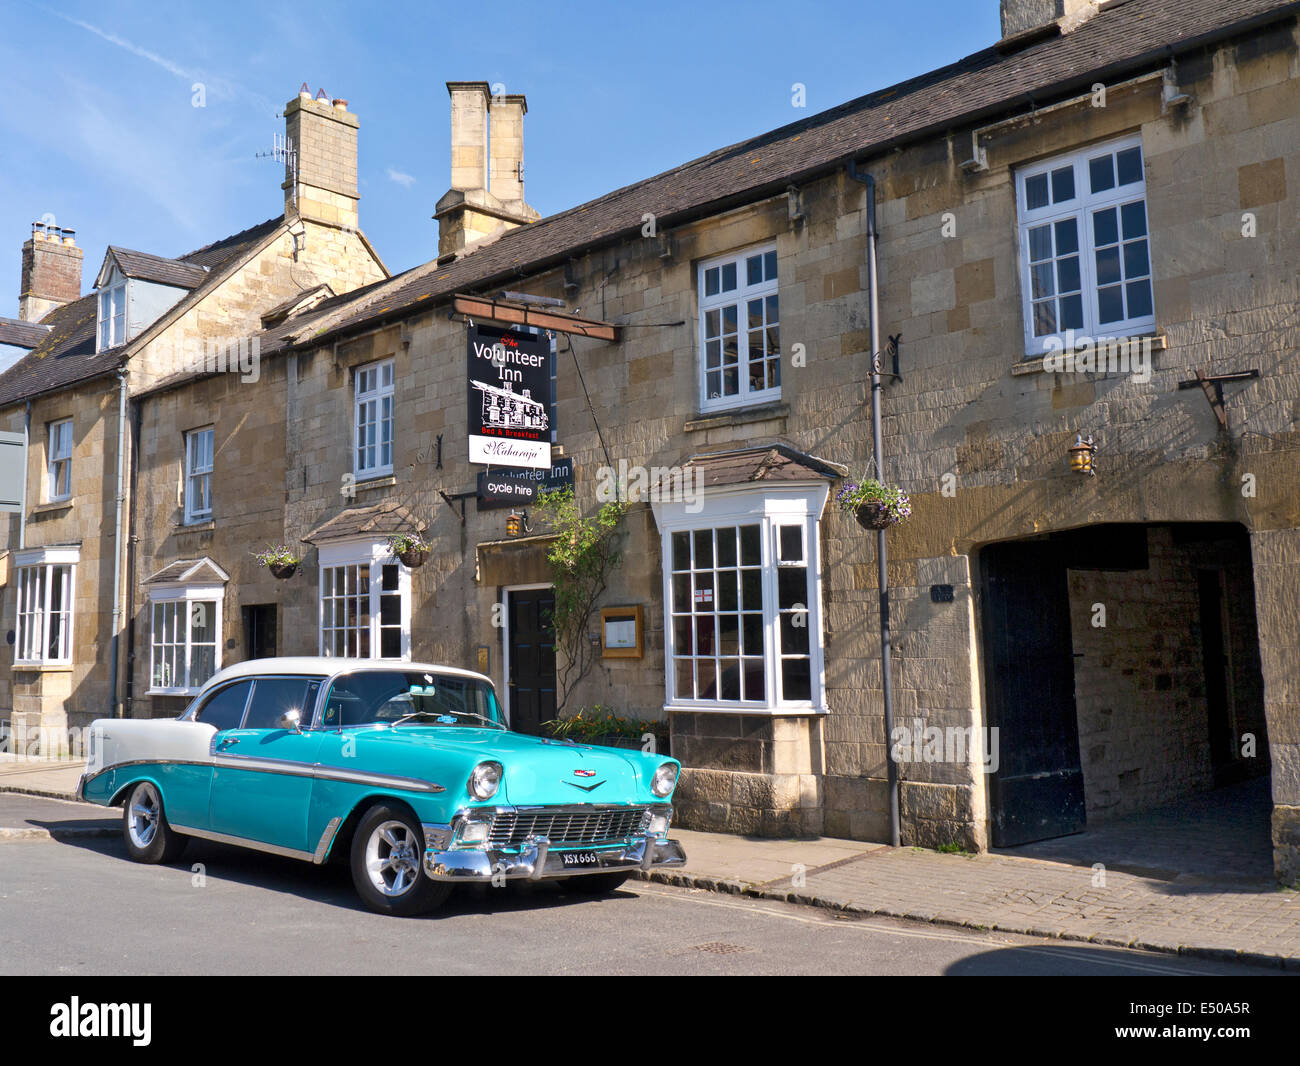 1950's/60's Chevrolet Bel Air Hardtop American classic car outside a historic old stone Cotswolds B&B public house Stock Photo